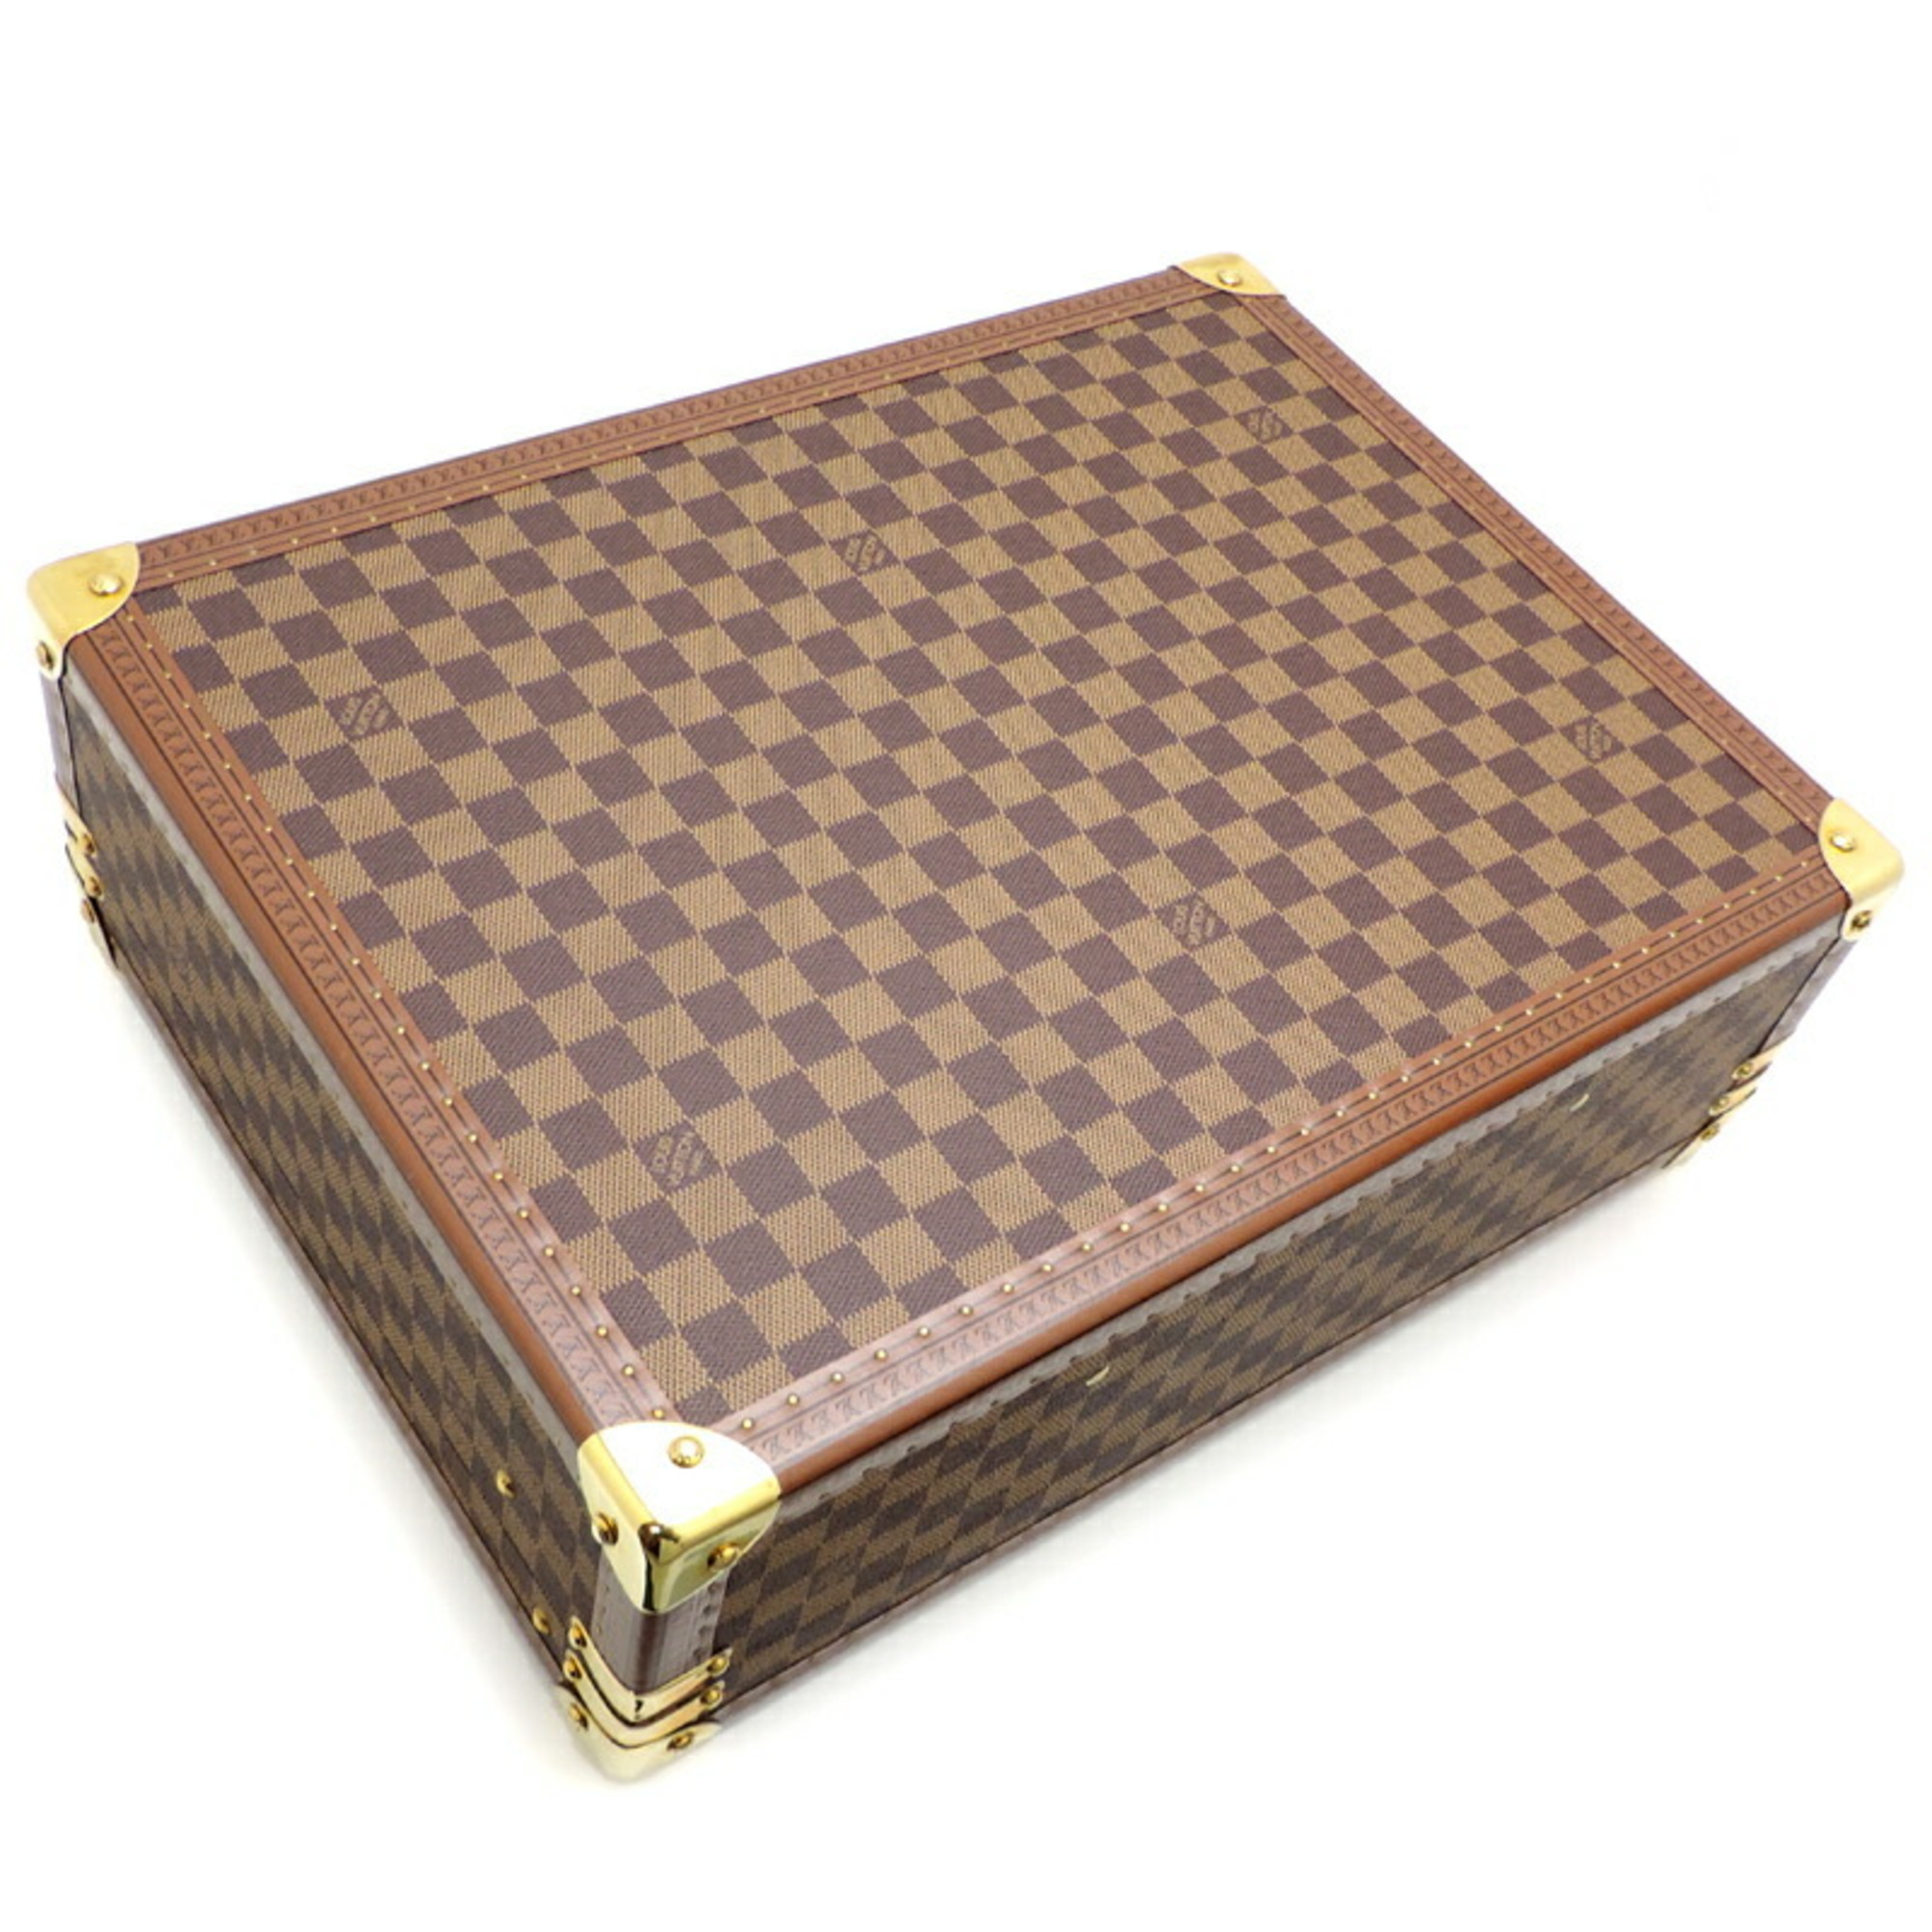 Louis Vuitton Cotteville 45 100th Anniversary Limited Edition Women's and Men's Trunk N21341 Damier Ebene